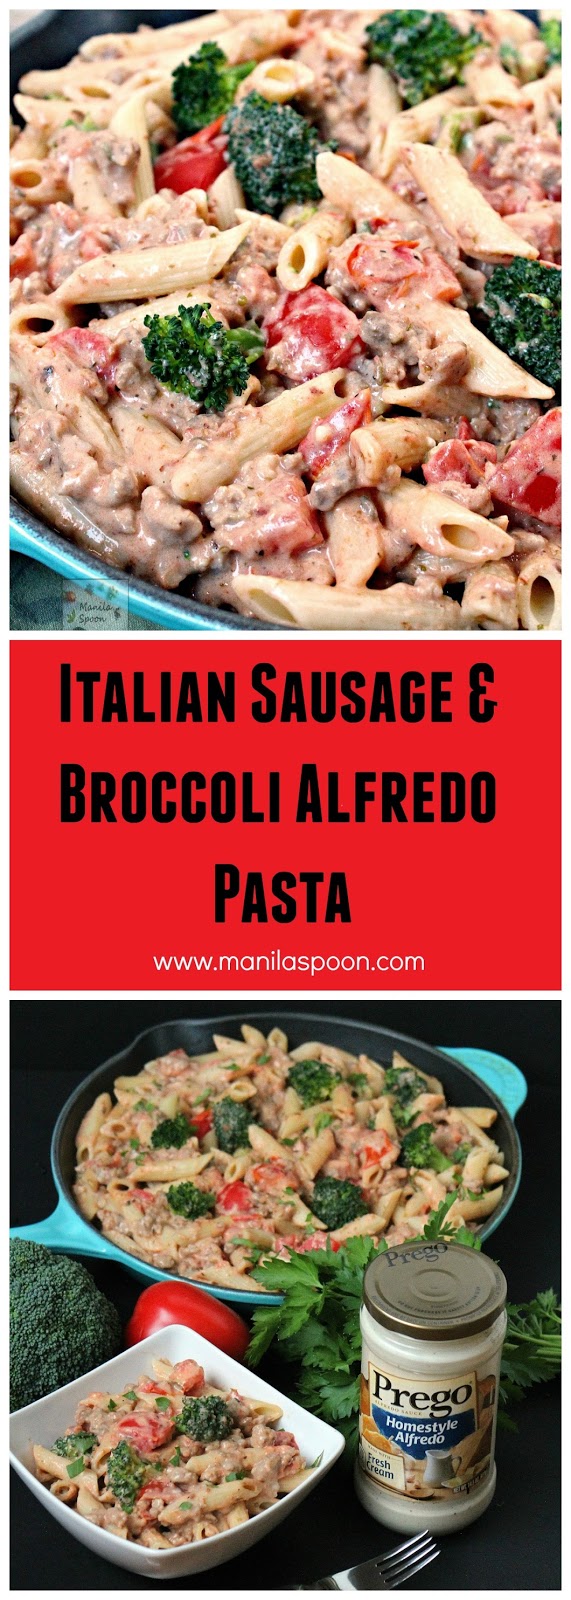 Ready in 30 minutes or less, this delicious Italian Sausage and Broccoli Alfredo Pasta meal makes dinner a breeze for Mom. Just five main ingredients is all you need! | manilaspoon.com